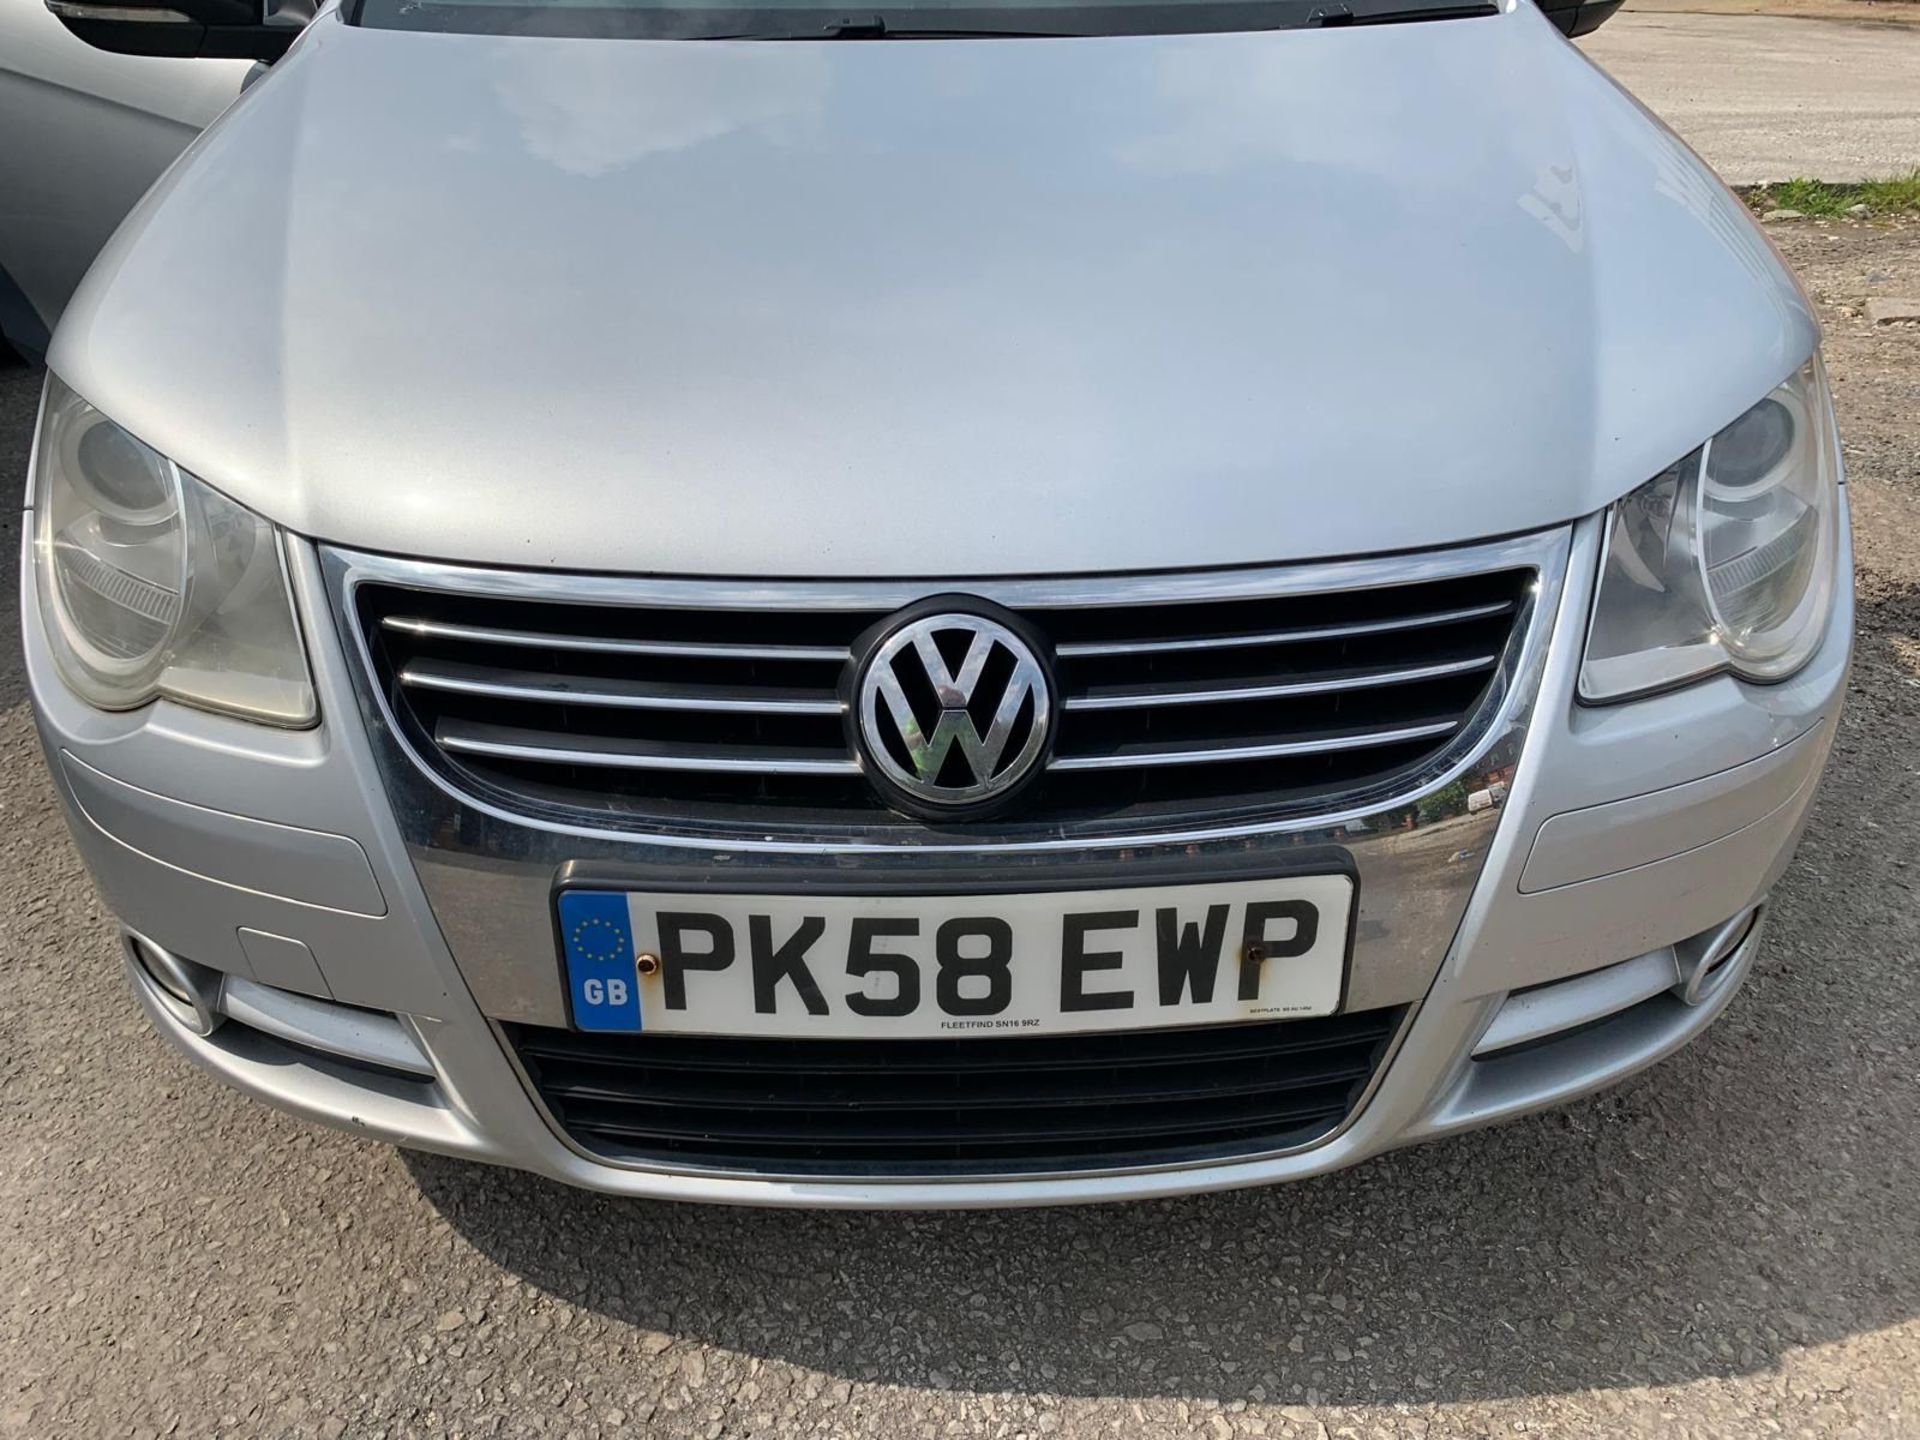 PK58 EWP VOLKSWAGEN EOS SILVER DIESEL MOT: 02.09.24 First Registration: 15.10.08 Number of services: - Image 2 of 10